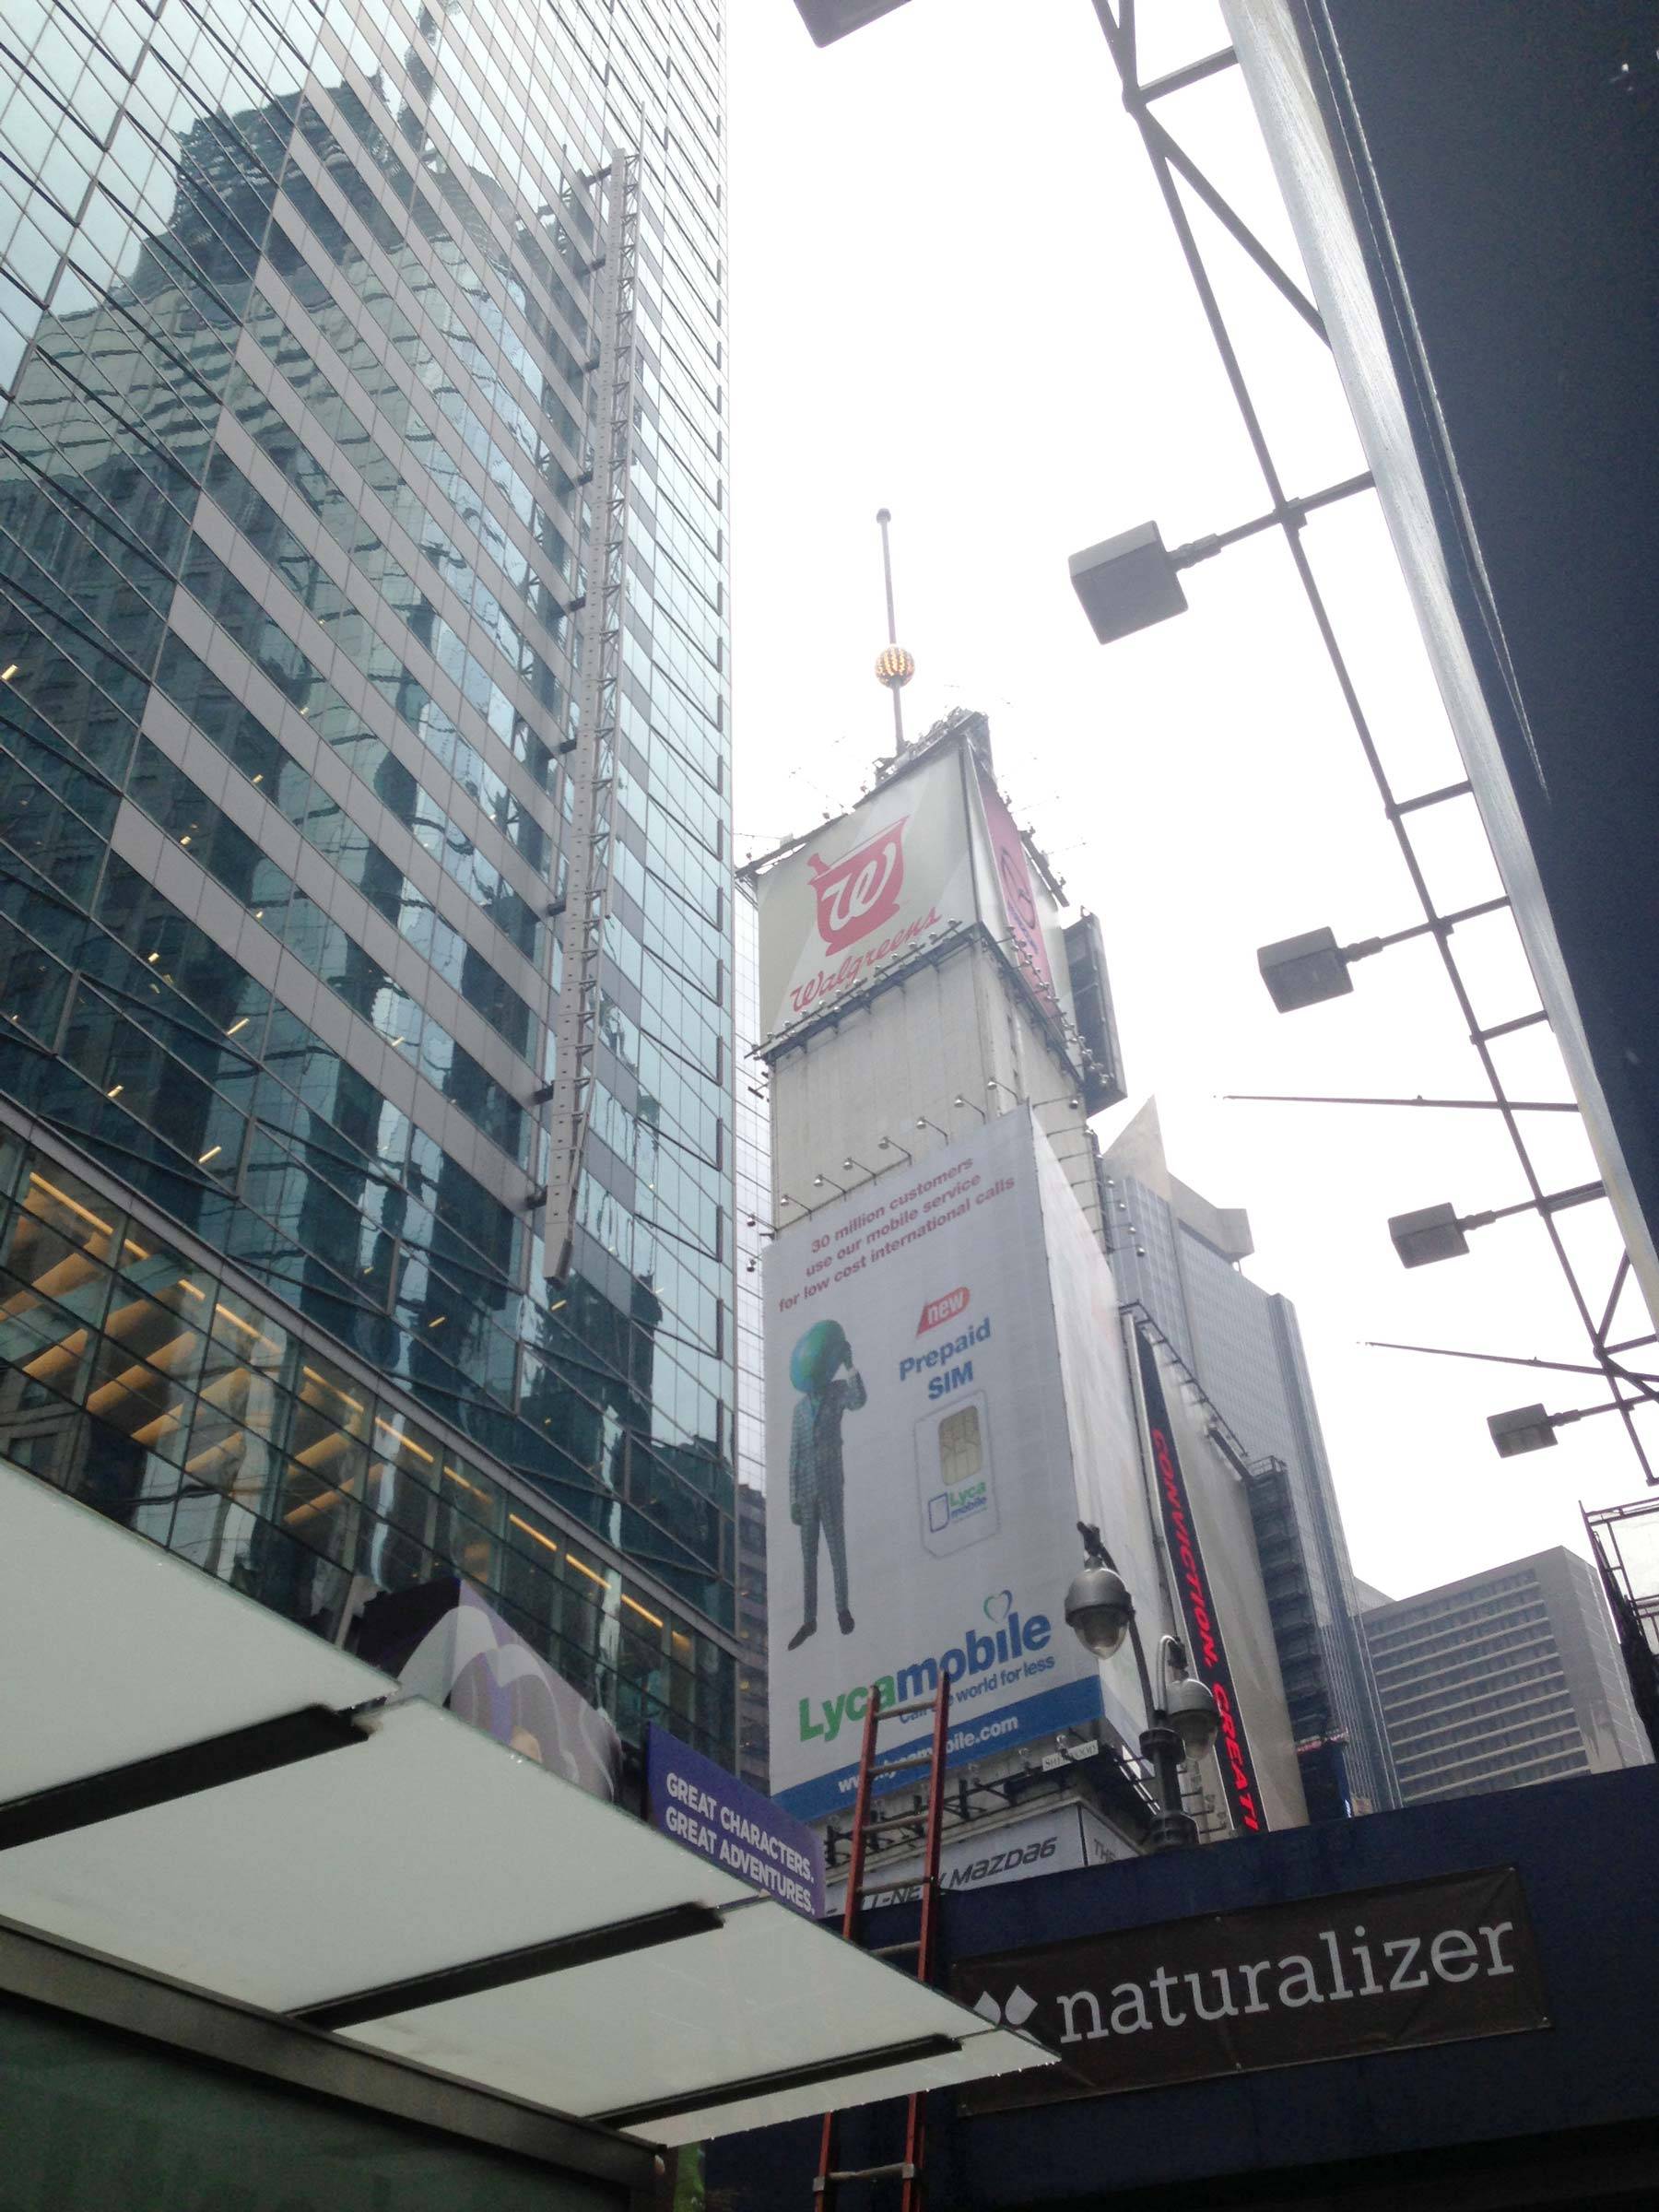 Tall buildings and adverts